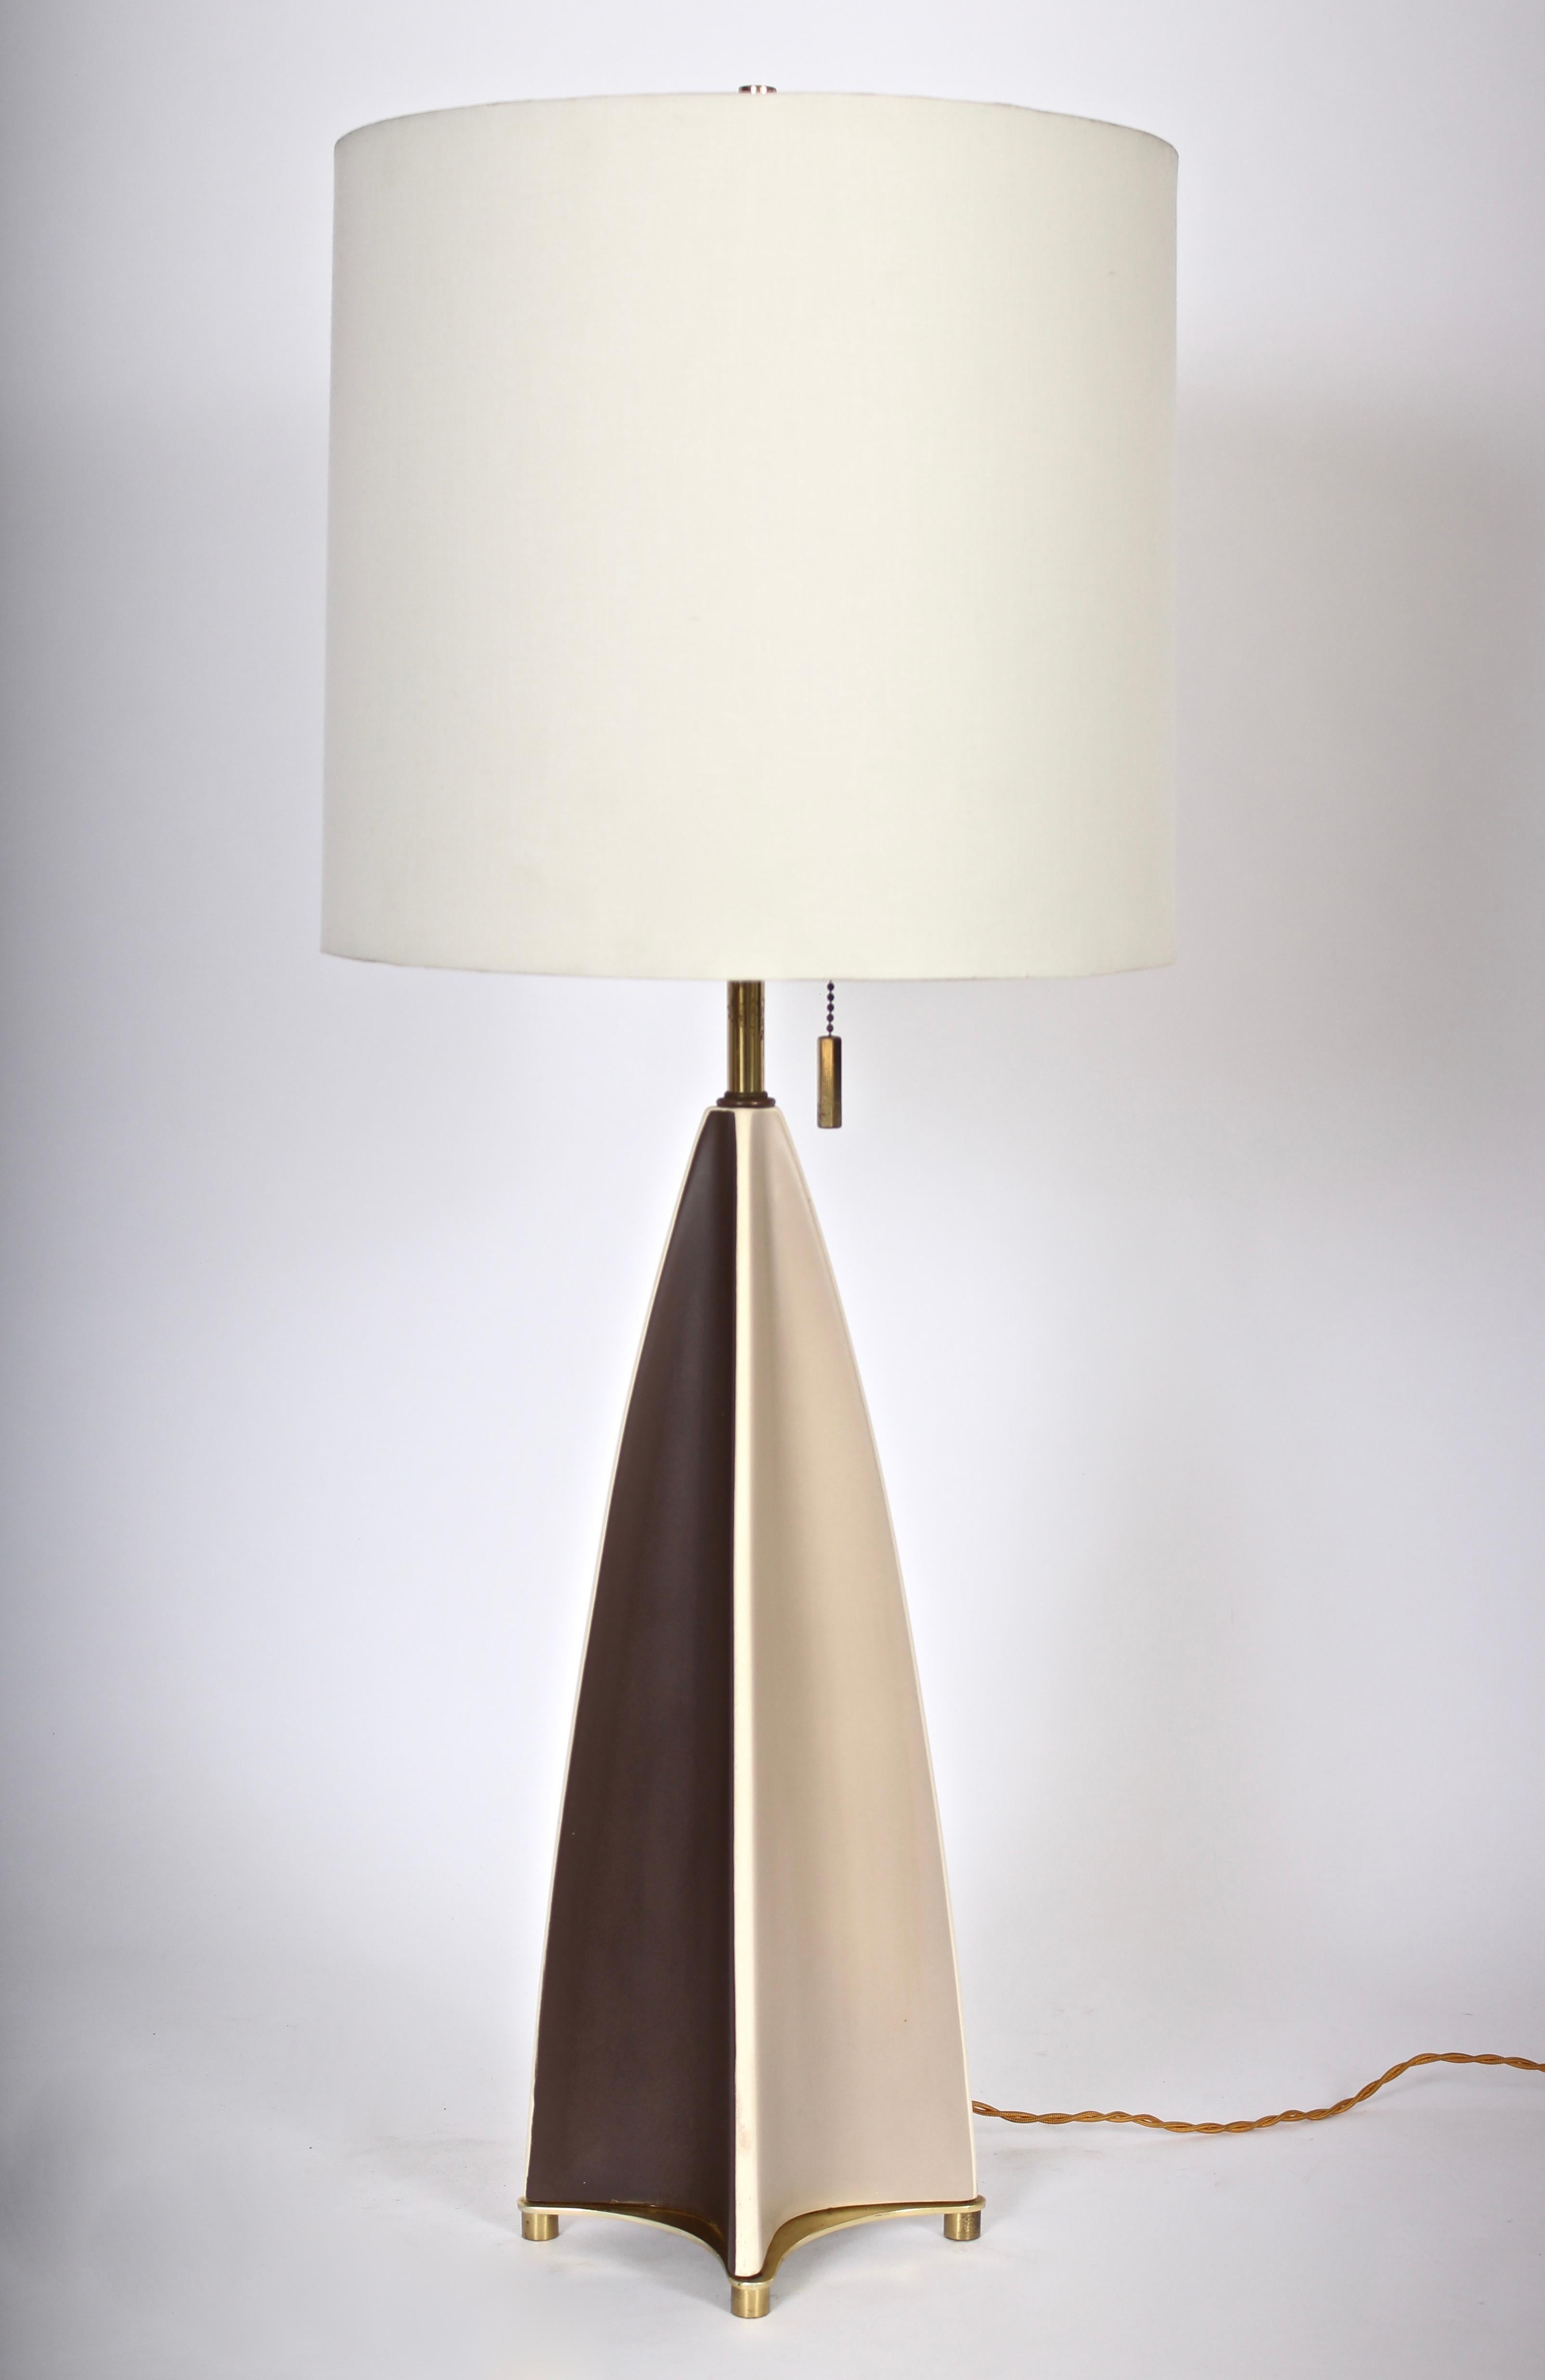 Classic three foot high Gerald Thurston for Lightolier Two-Tone Parabolic Fin Porcelain Table Lamp. Featuring concave forms in dark chocolate and taupe with brass base and feet. Triple sockets. 36 H top of finial with original harp in place. 24 H to